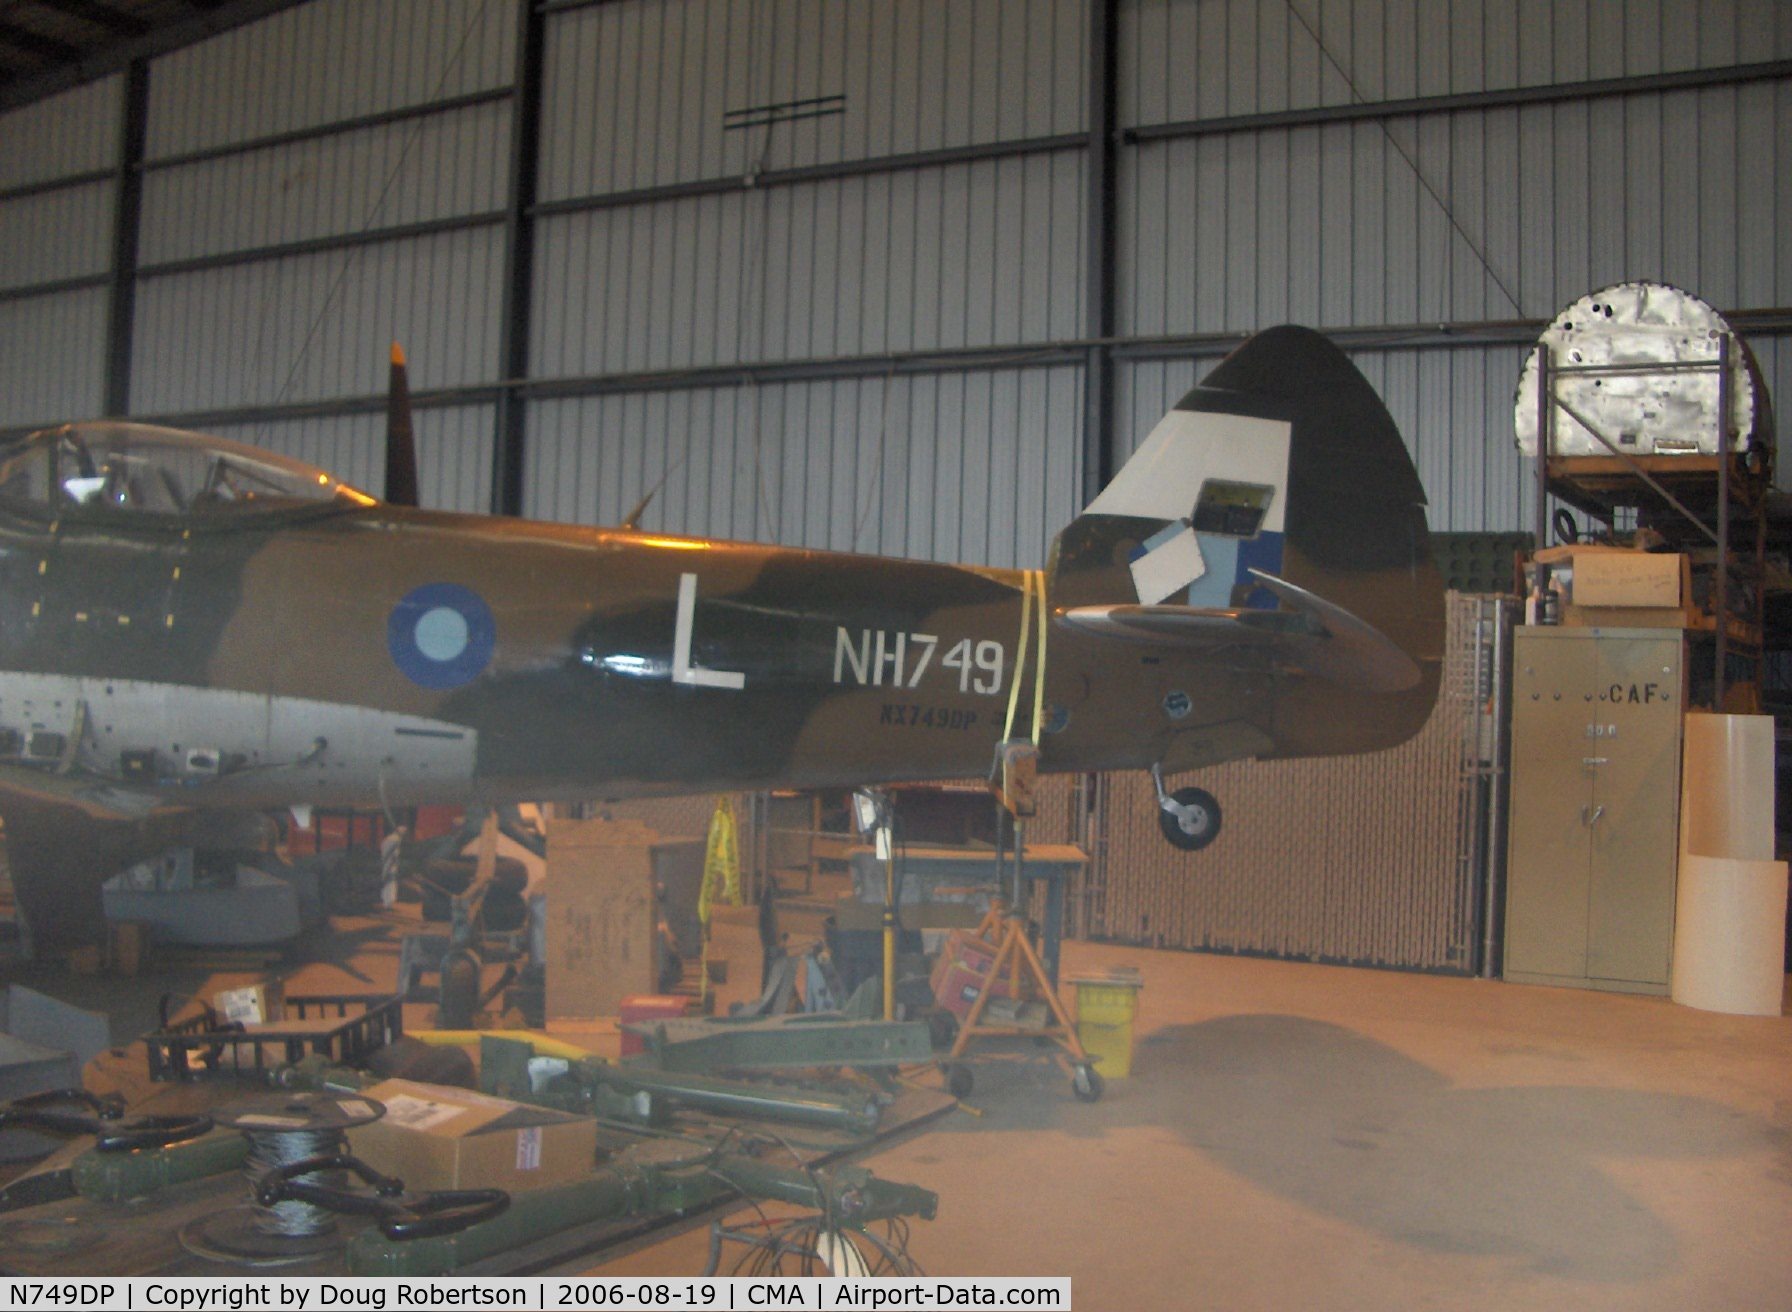 N749DP, 1945 Supermarine Spitfire XIV C/N 6S/583887, In restoration as NX749DP-1945 Vickers/Supermarine SPITFIRE Mk XIVe, Rolls Royce Griffon 65 2,050 Hp V-12, the high altitude design Mk XIVe has more power, a cut down dorsal fuselage and larger fin and rudder